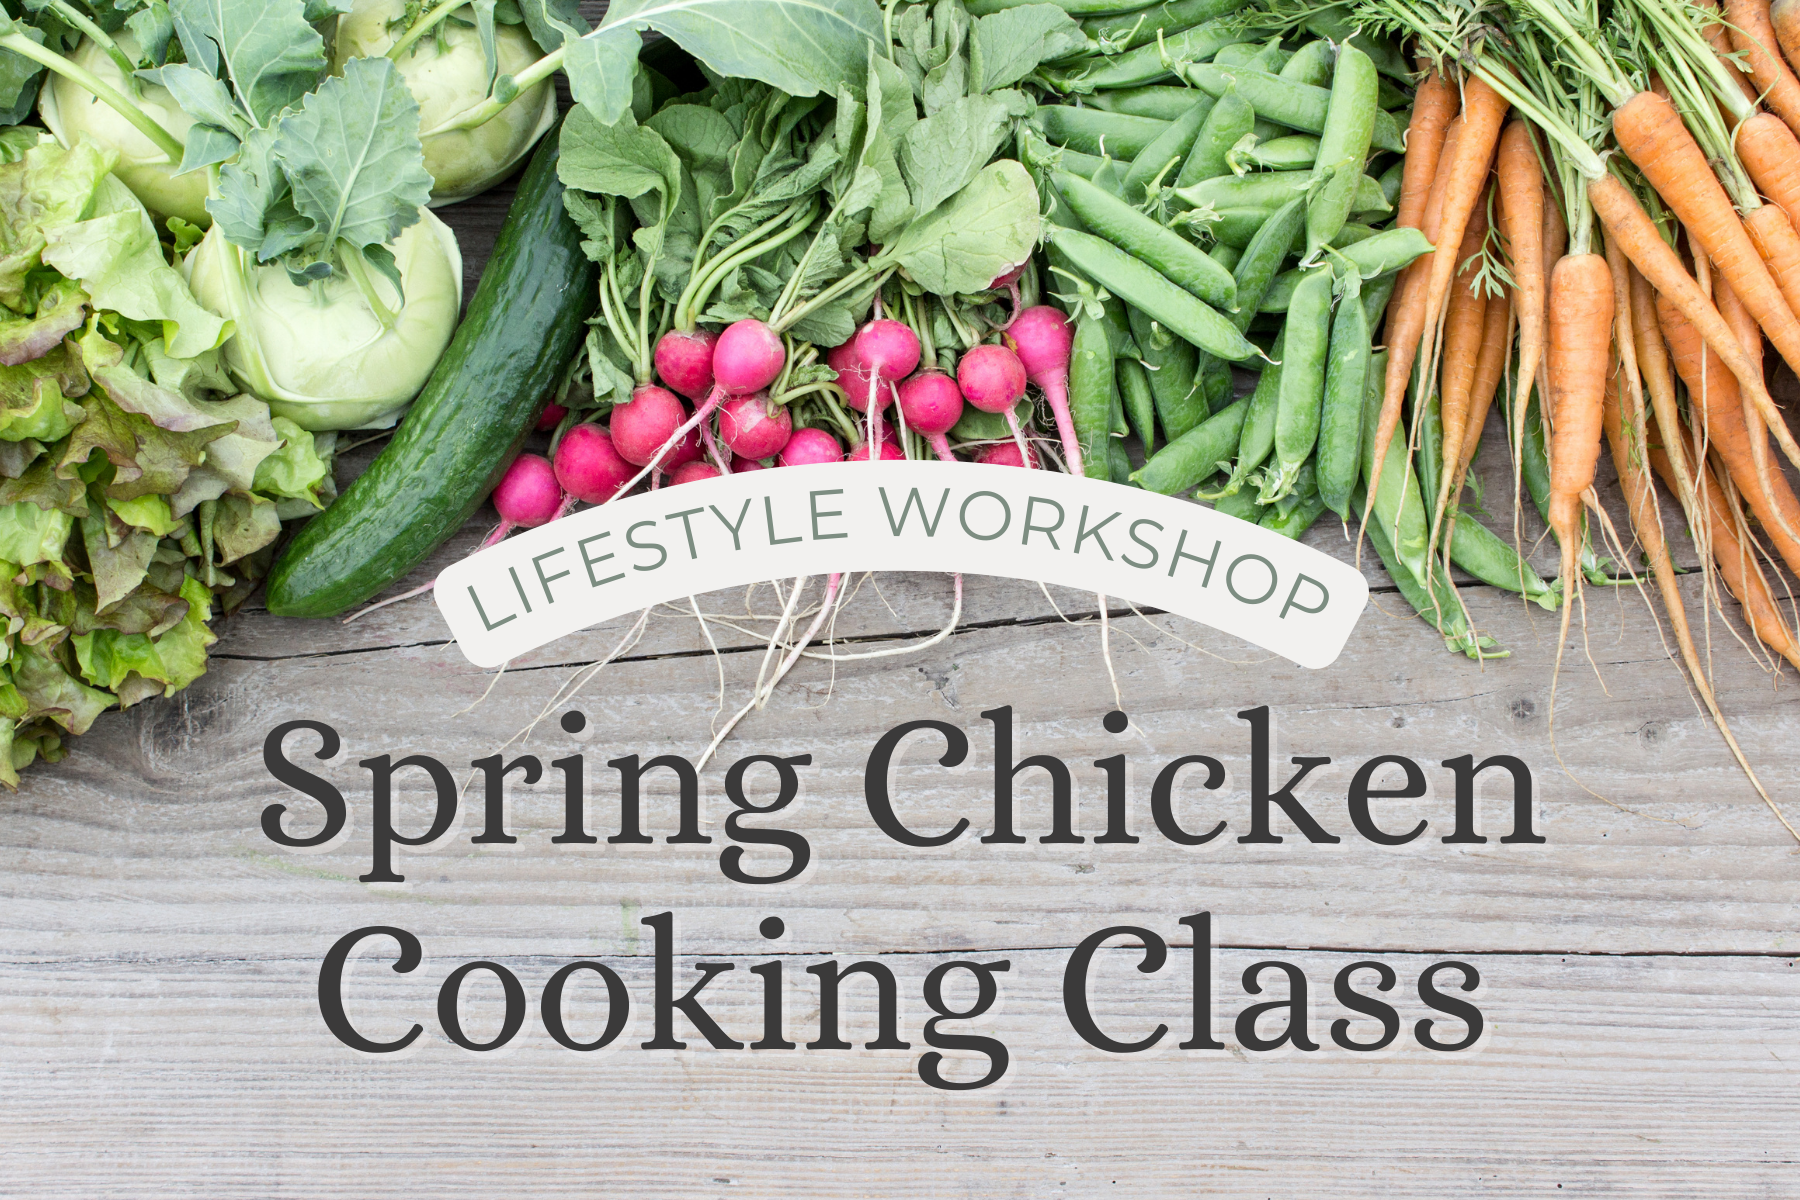 Spring Cooking Class in Tulsa OK, cooking demonstration with chicken and vegetables